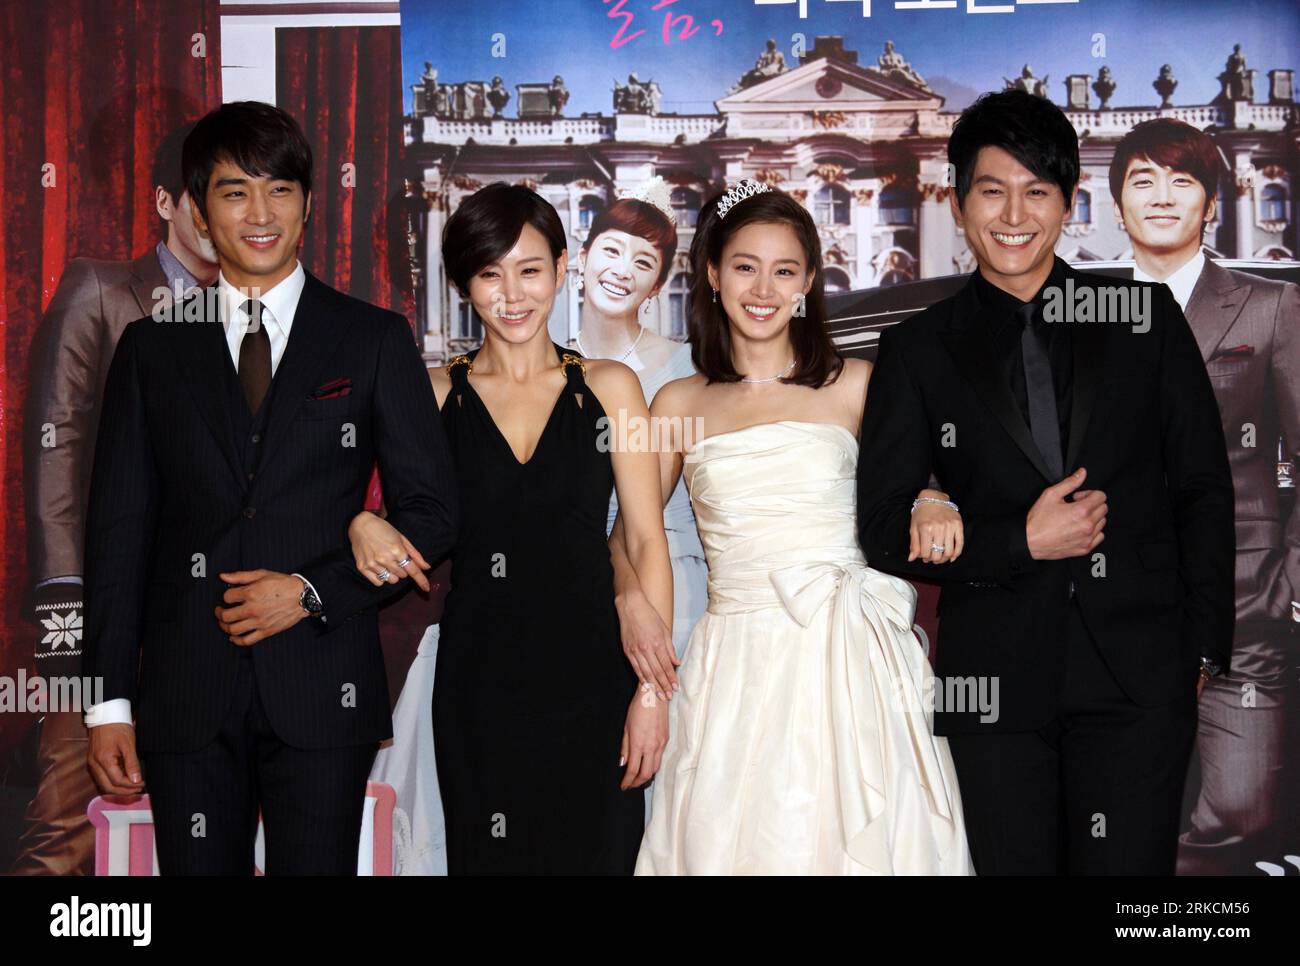 Bildnummer: 54780827  Datum: 03.01.2011  Copyright: imago/Xinhua (110103) -- SEOUL, Jan. 3, 2011 (Xinhua)-- Cast members of TV series My Princess Song Seung Hun, Park Ye Jin, Ryu Soo Young and Kim Tae Hee (from L to R) take parts in a preview event of the new TV series My Princess in Seoul, South Korea, Jan. 3, 2011. My Princess will be on show since Jan. 5, 2011. (Xinhua/He Lulu) (yc) SOUTH KOREA-SEOUL-TV SERIES PUBLICATIONxNOTxINxCHN Entertainment People Film TV kbdig xsp 2011 quer     Bildnummer 54780827 Date 03 01 2011 Copyright Imago XINHUA  Seoul Jan 3 2011 XINHUA Cast Members of TV Seri Stock Photo